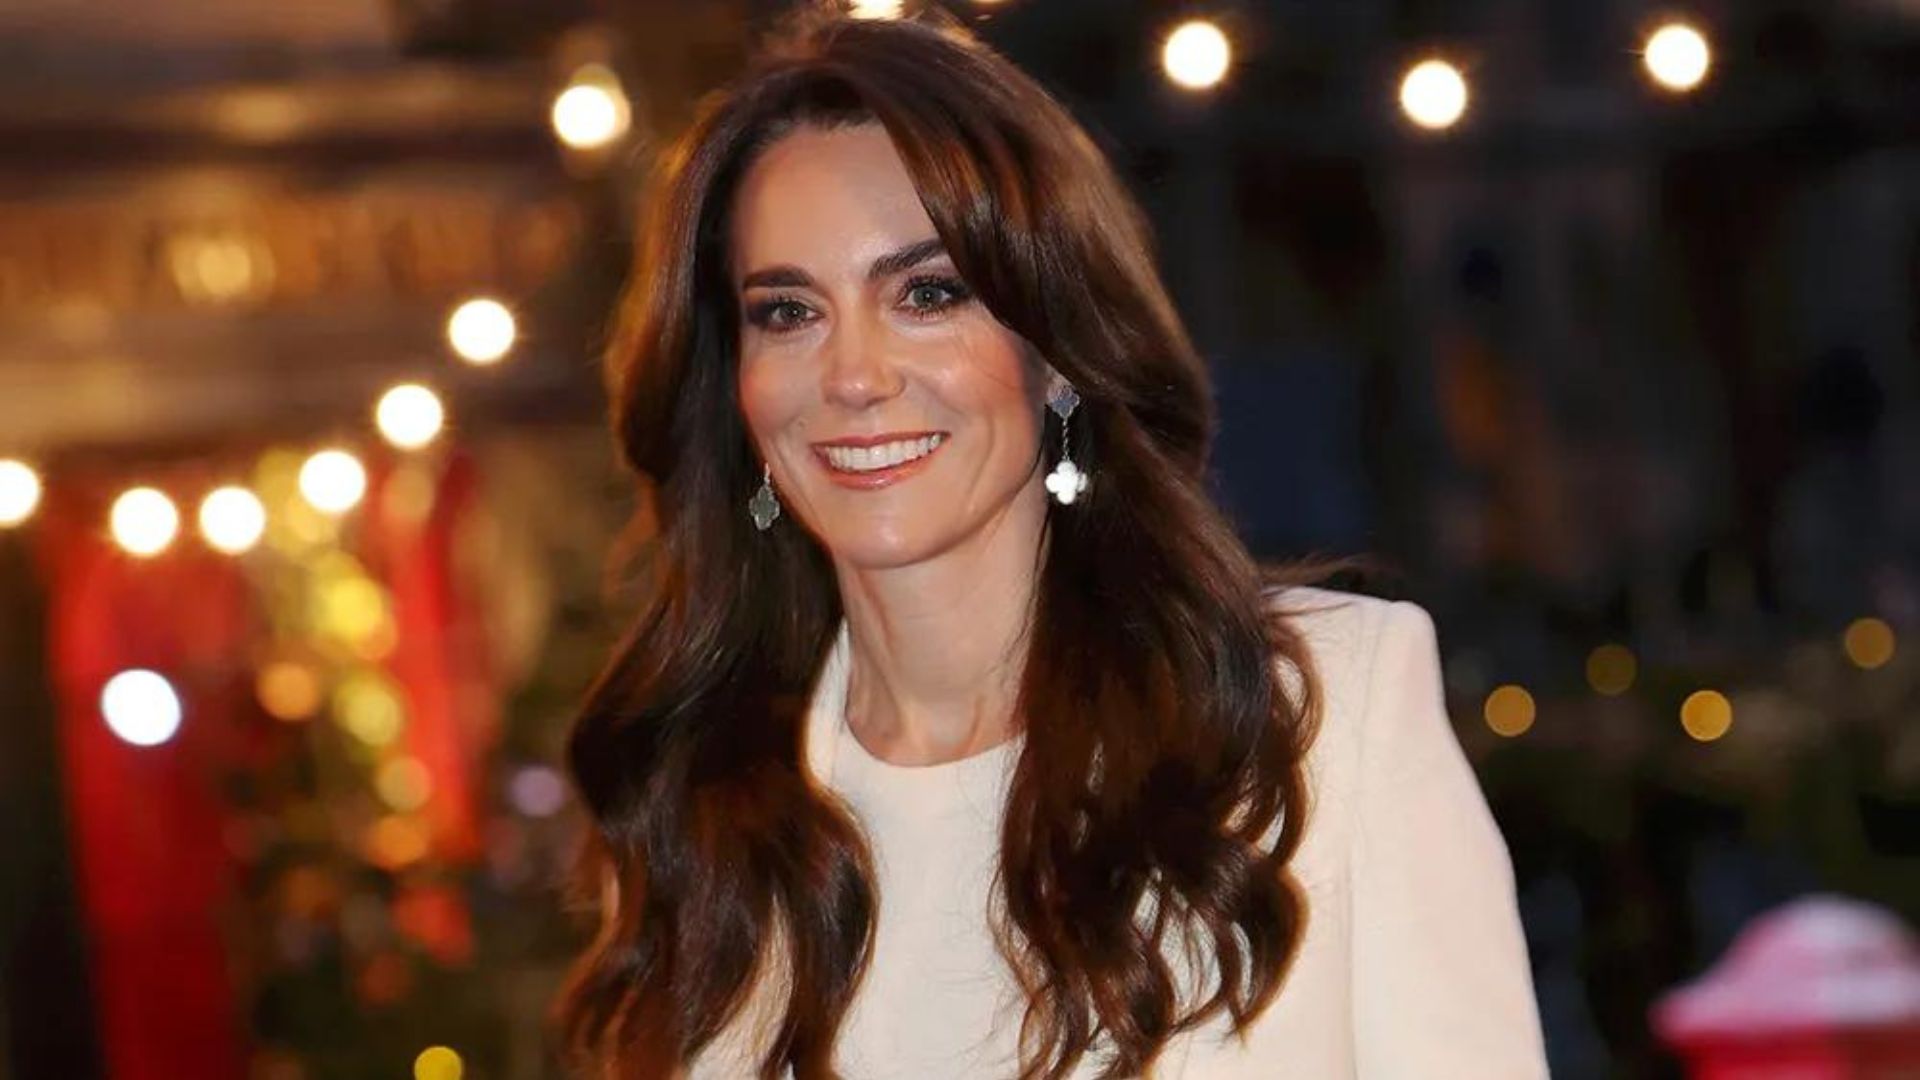 Due to her young children, Kate Middleton postponed disclosing her cancer diagnosis